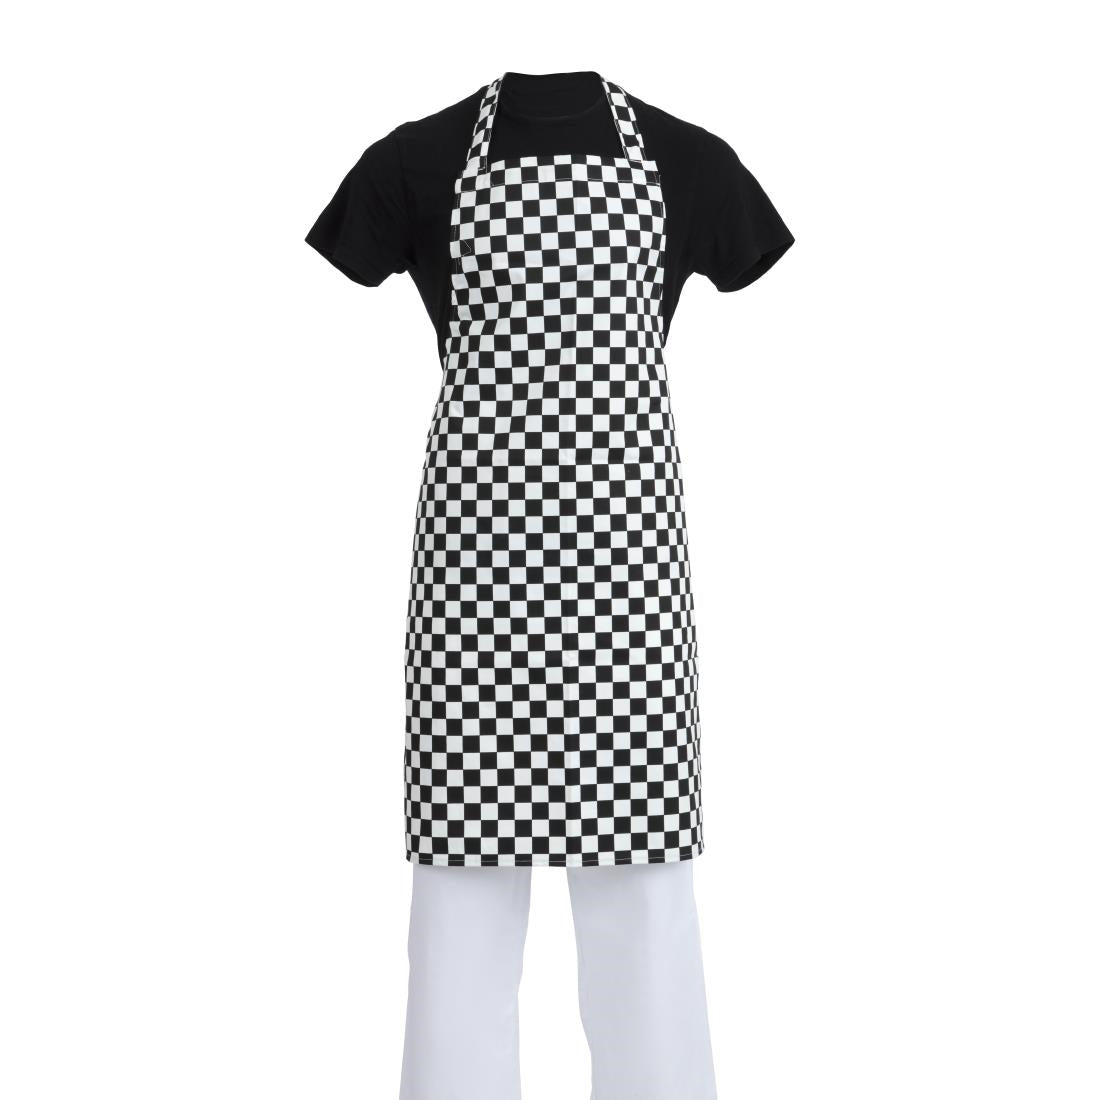 A275 Whites Bib Apron Black and White Check JD Catering Equipment Solutions Ltd